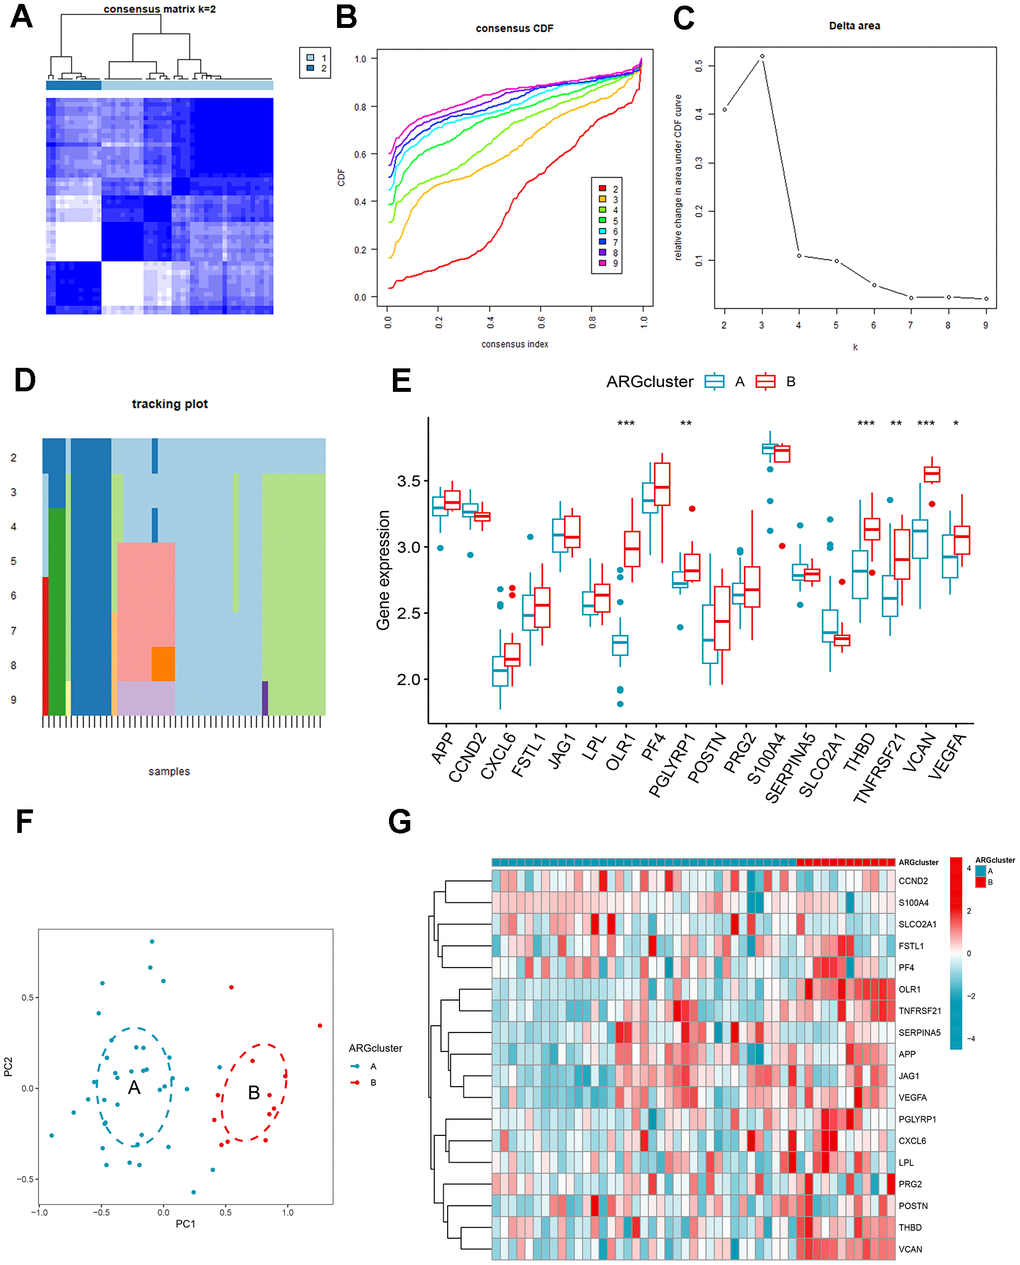 Identification and gene expression analysis of ARG patterns. (A) Consensus matrix with k=2. (B) Cumulative distribution function (CDF) of consensus clustering. (C) Delta area plot of consensus clustering. (D) Tracking plot. The abscissa represented different samples, and various color blocks indicated subtypes. (E) The expression of 18 ARGs in different clusters. (F) Principal component analysis (PCA). (G) Differential expression heat map of 18 ARGs.